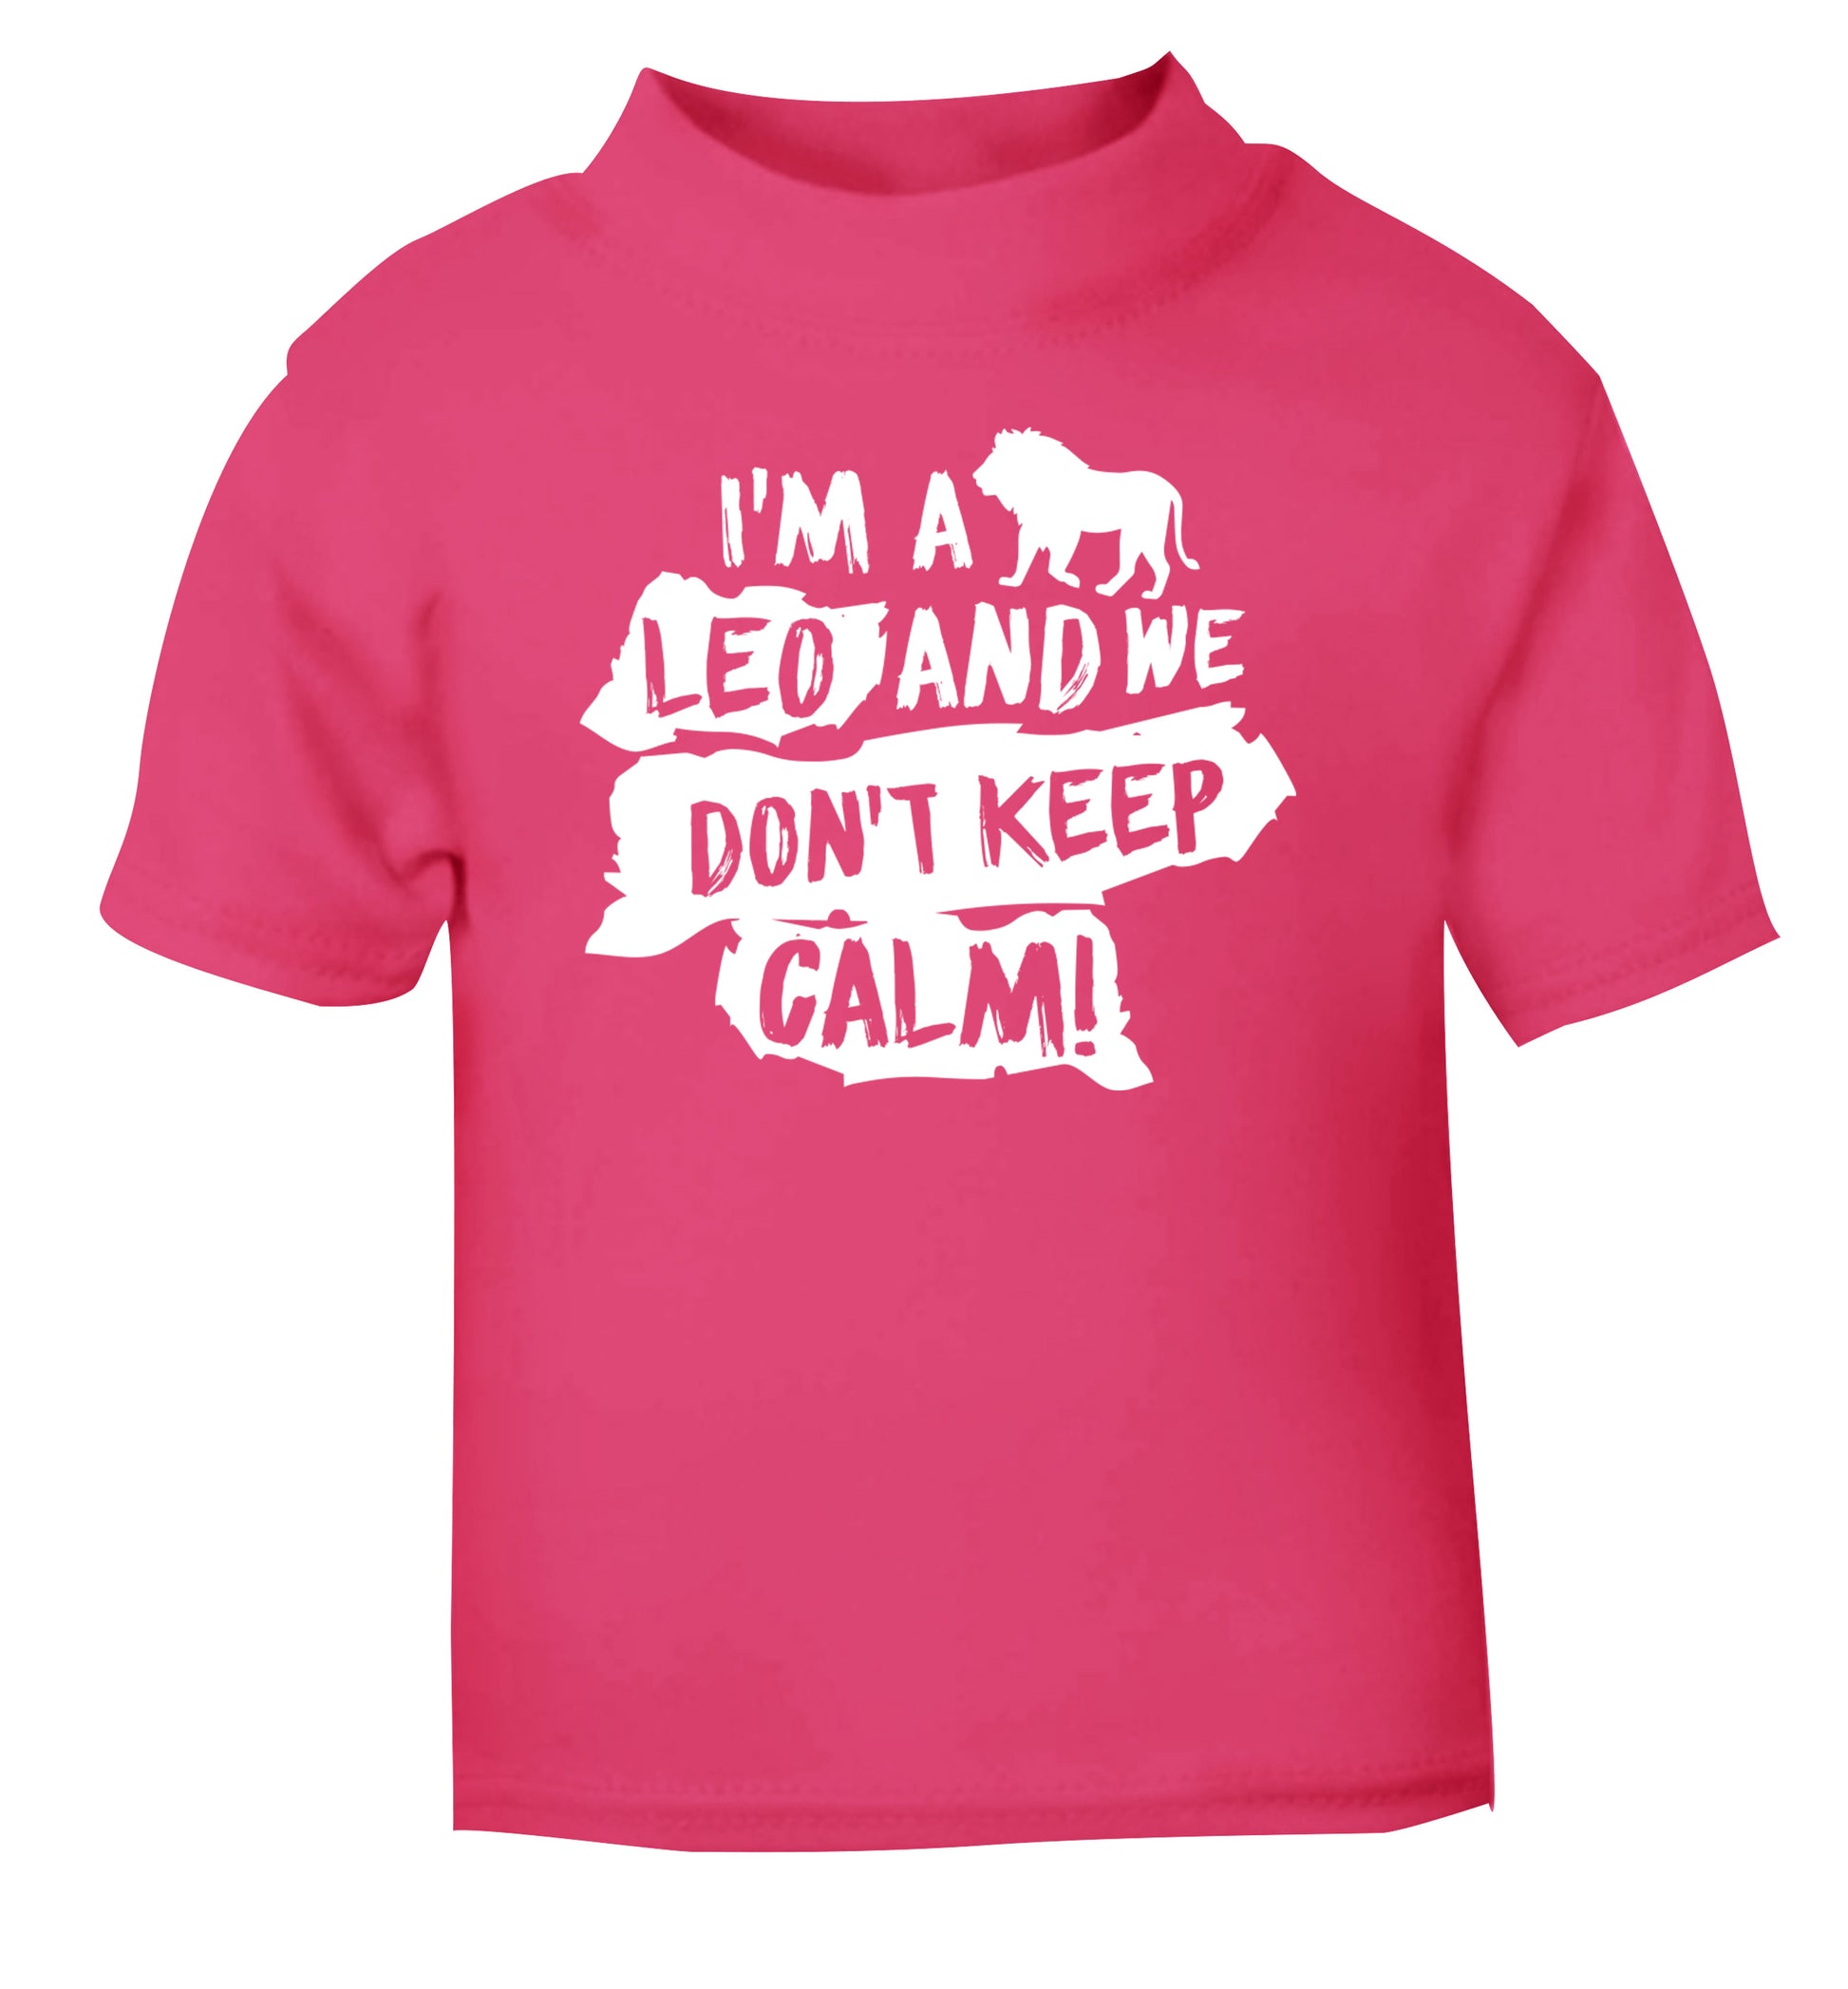 I'm a leo and we don't keep calm! pink Baby Toddler Tshirt 2 Years